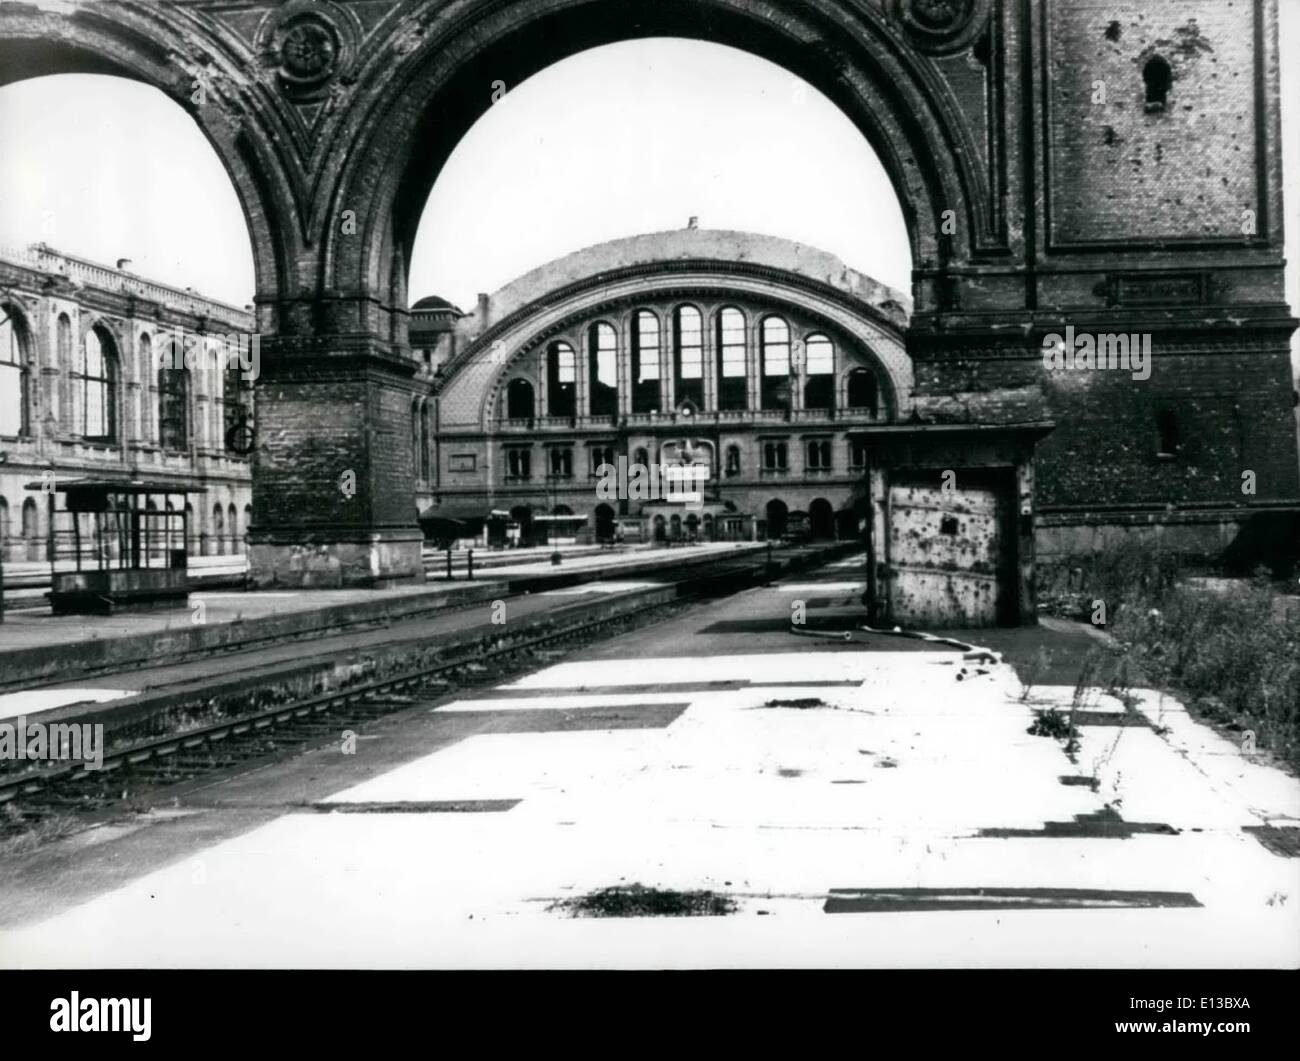 Feb. 29, 2012 - The situation of Berlin. All traffic came to halt at West Berlin railway stations. Keystone Munich Picture Nov. 16th 1958 Stock Photo